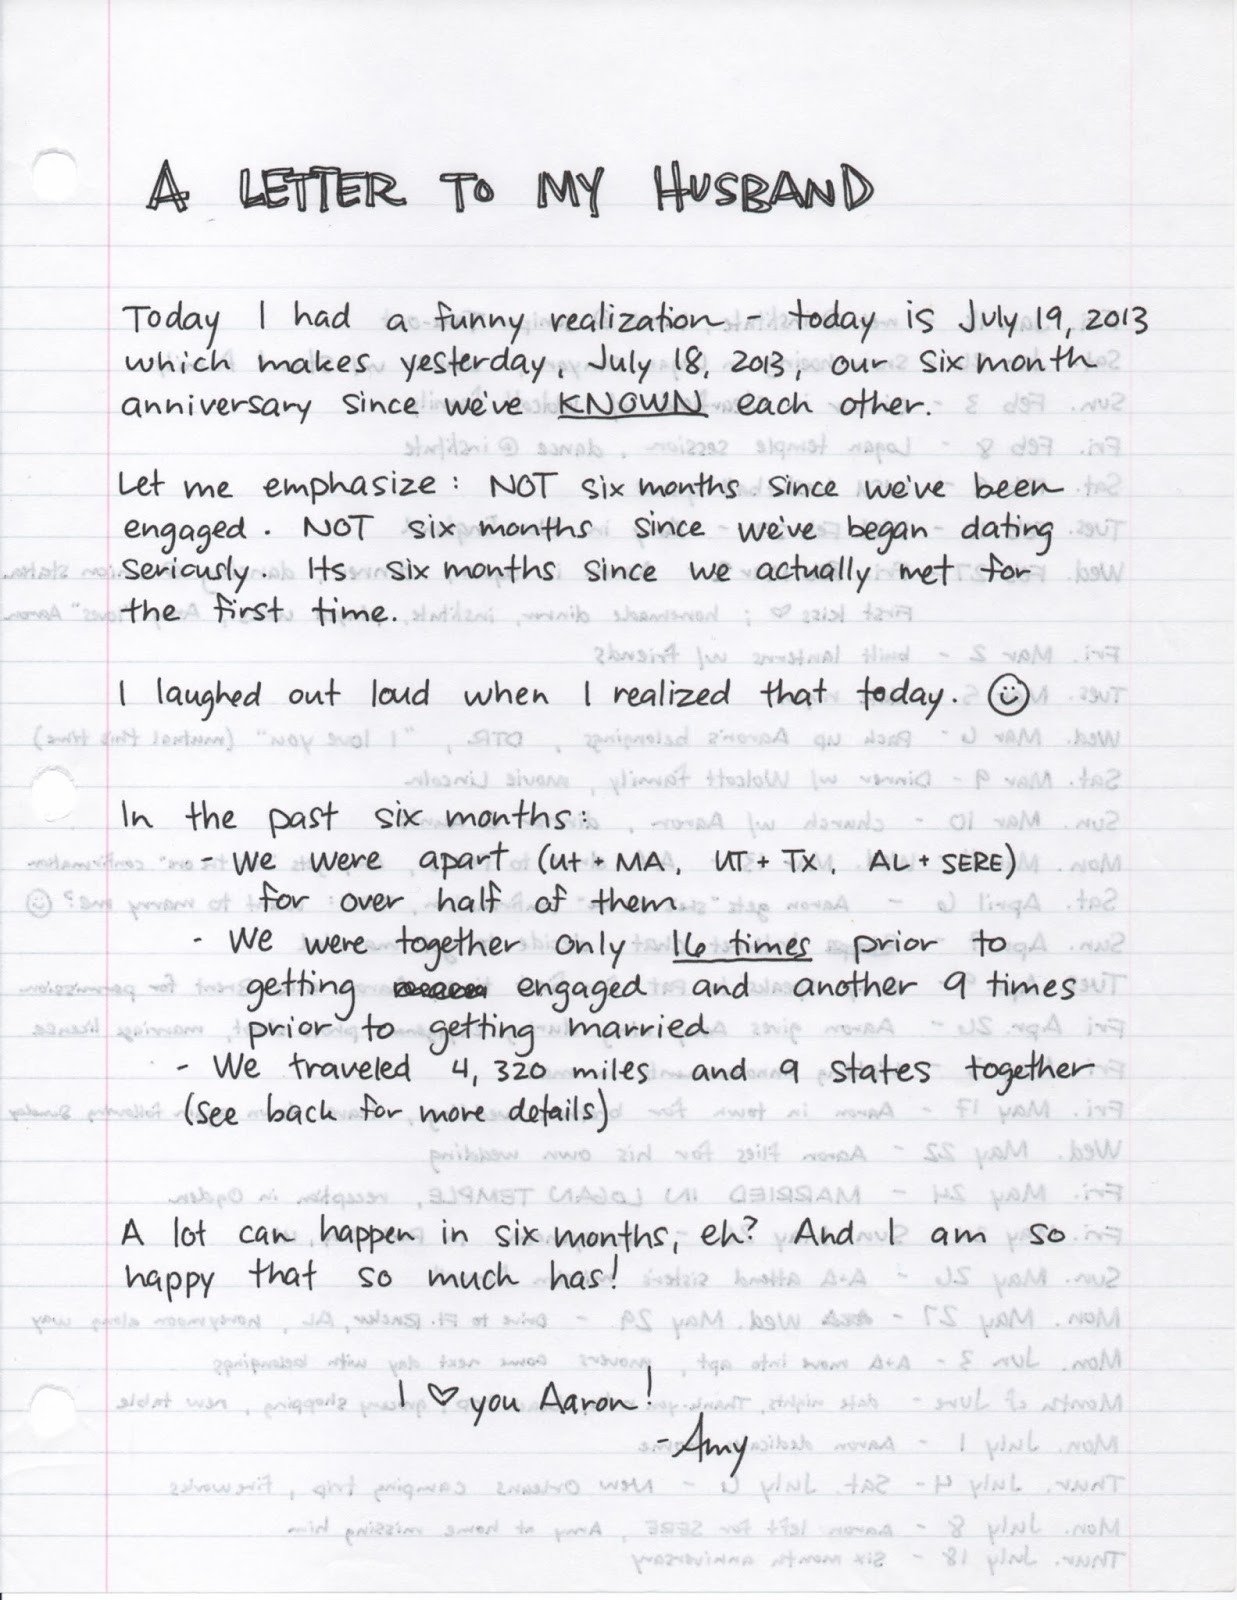 A Letter to My Husband